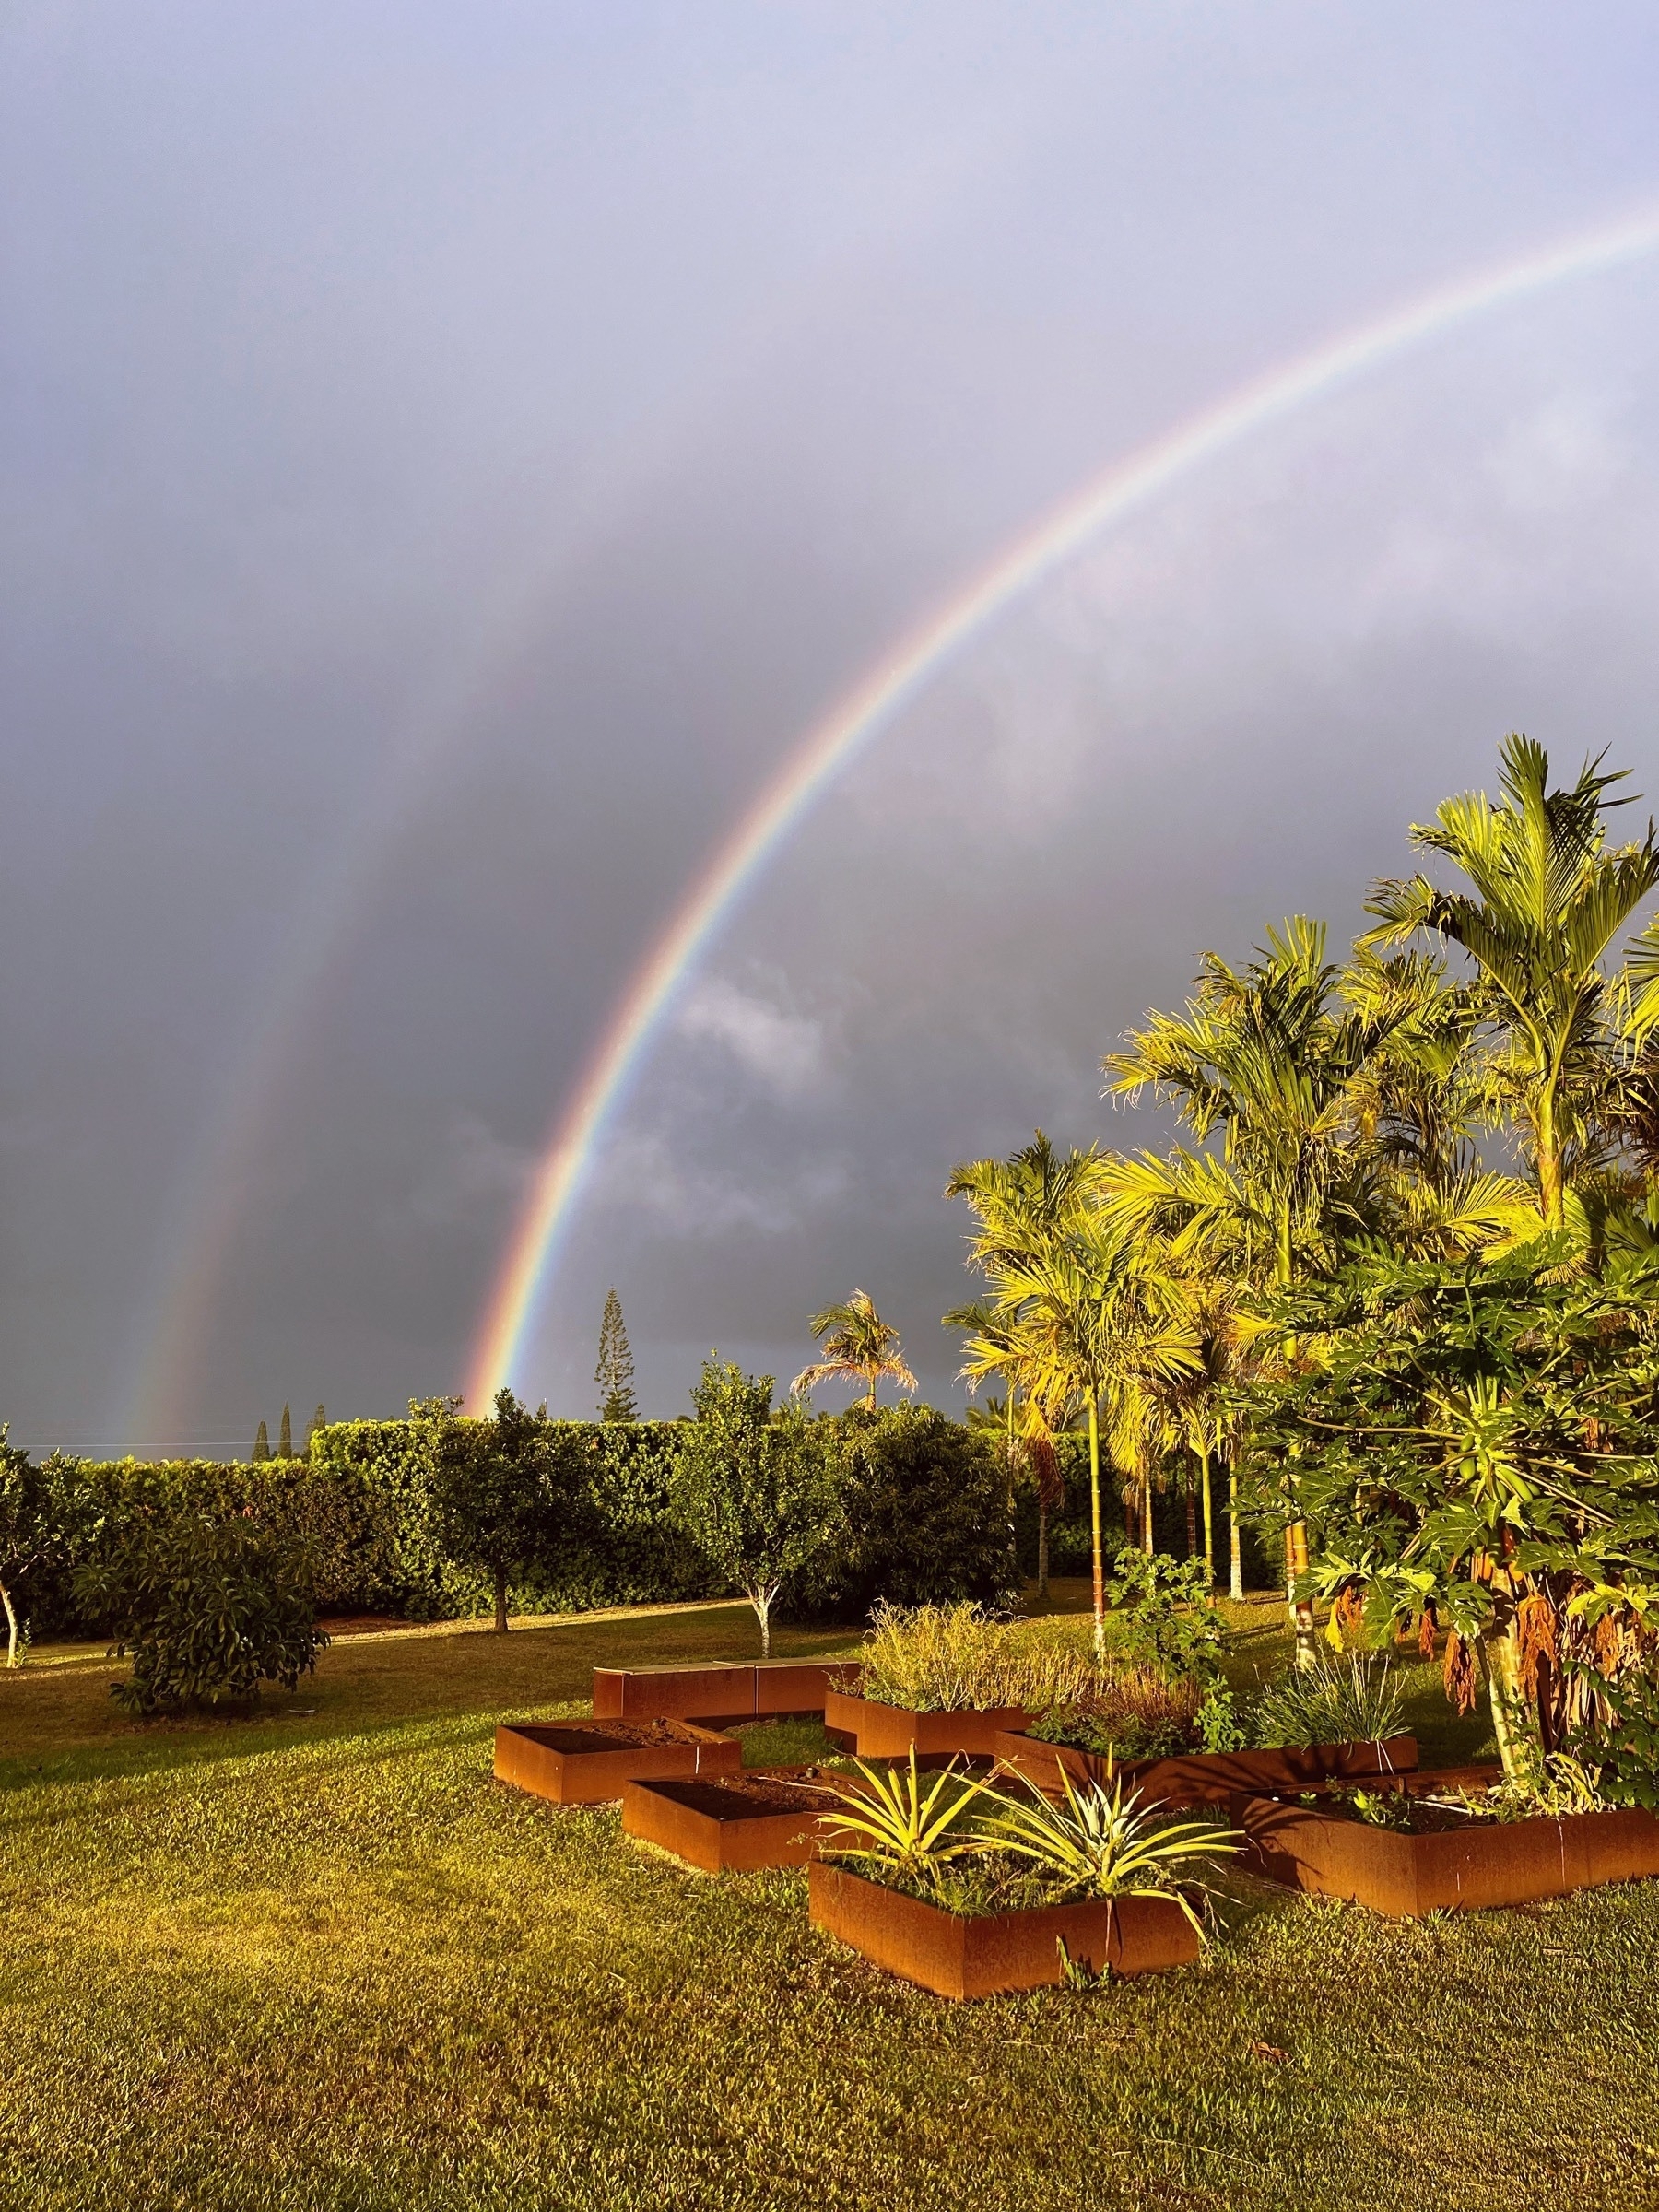 Two rainbows and grey sky above a garden of bettlenuts and vegetable planters